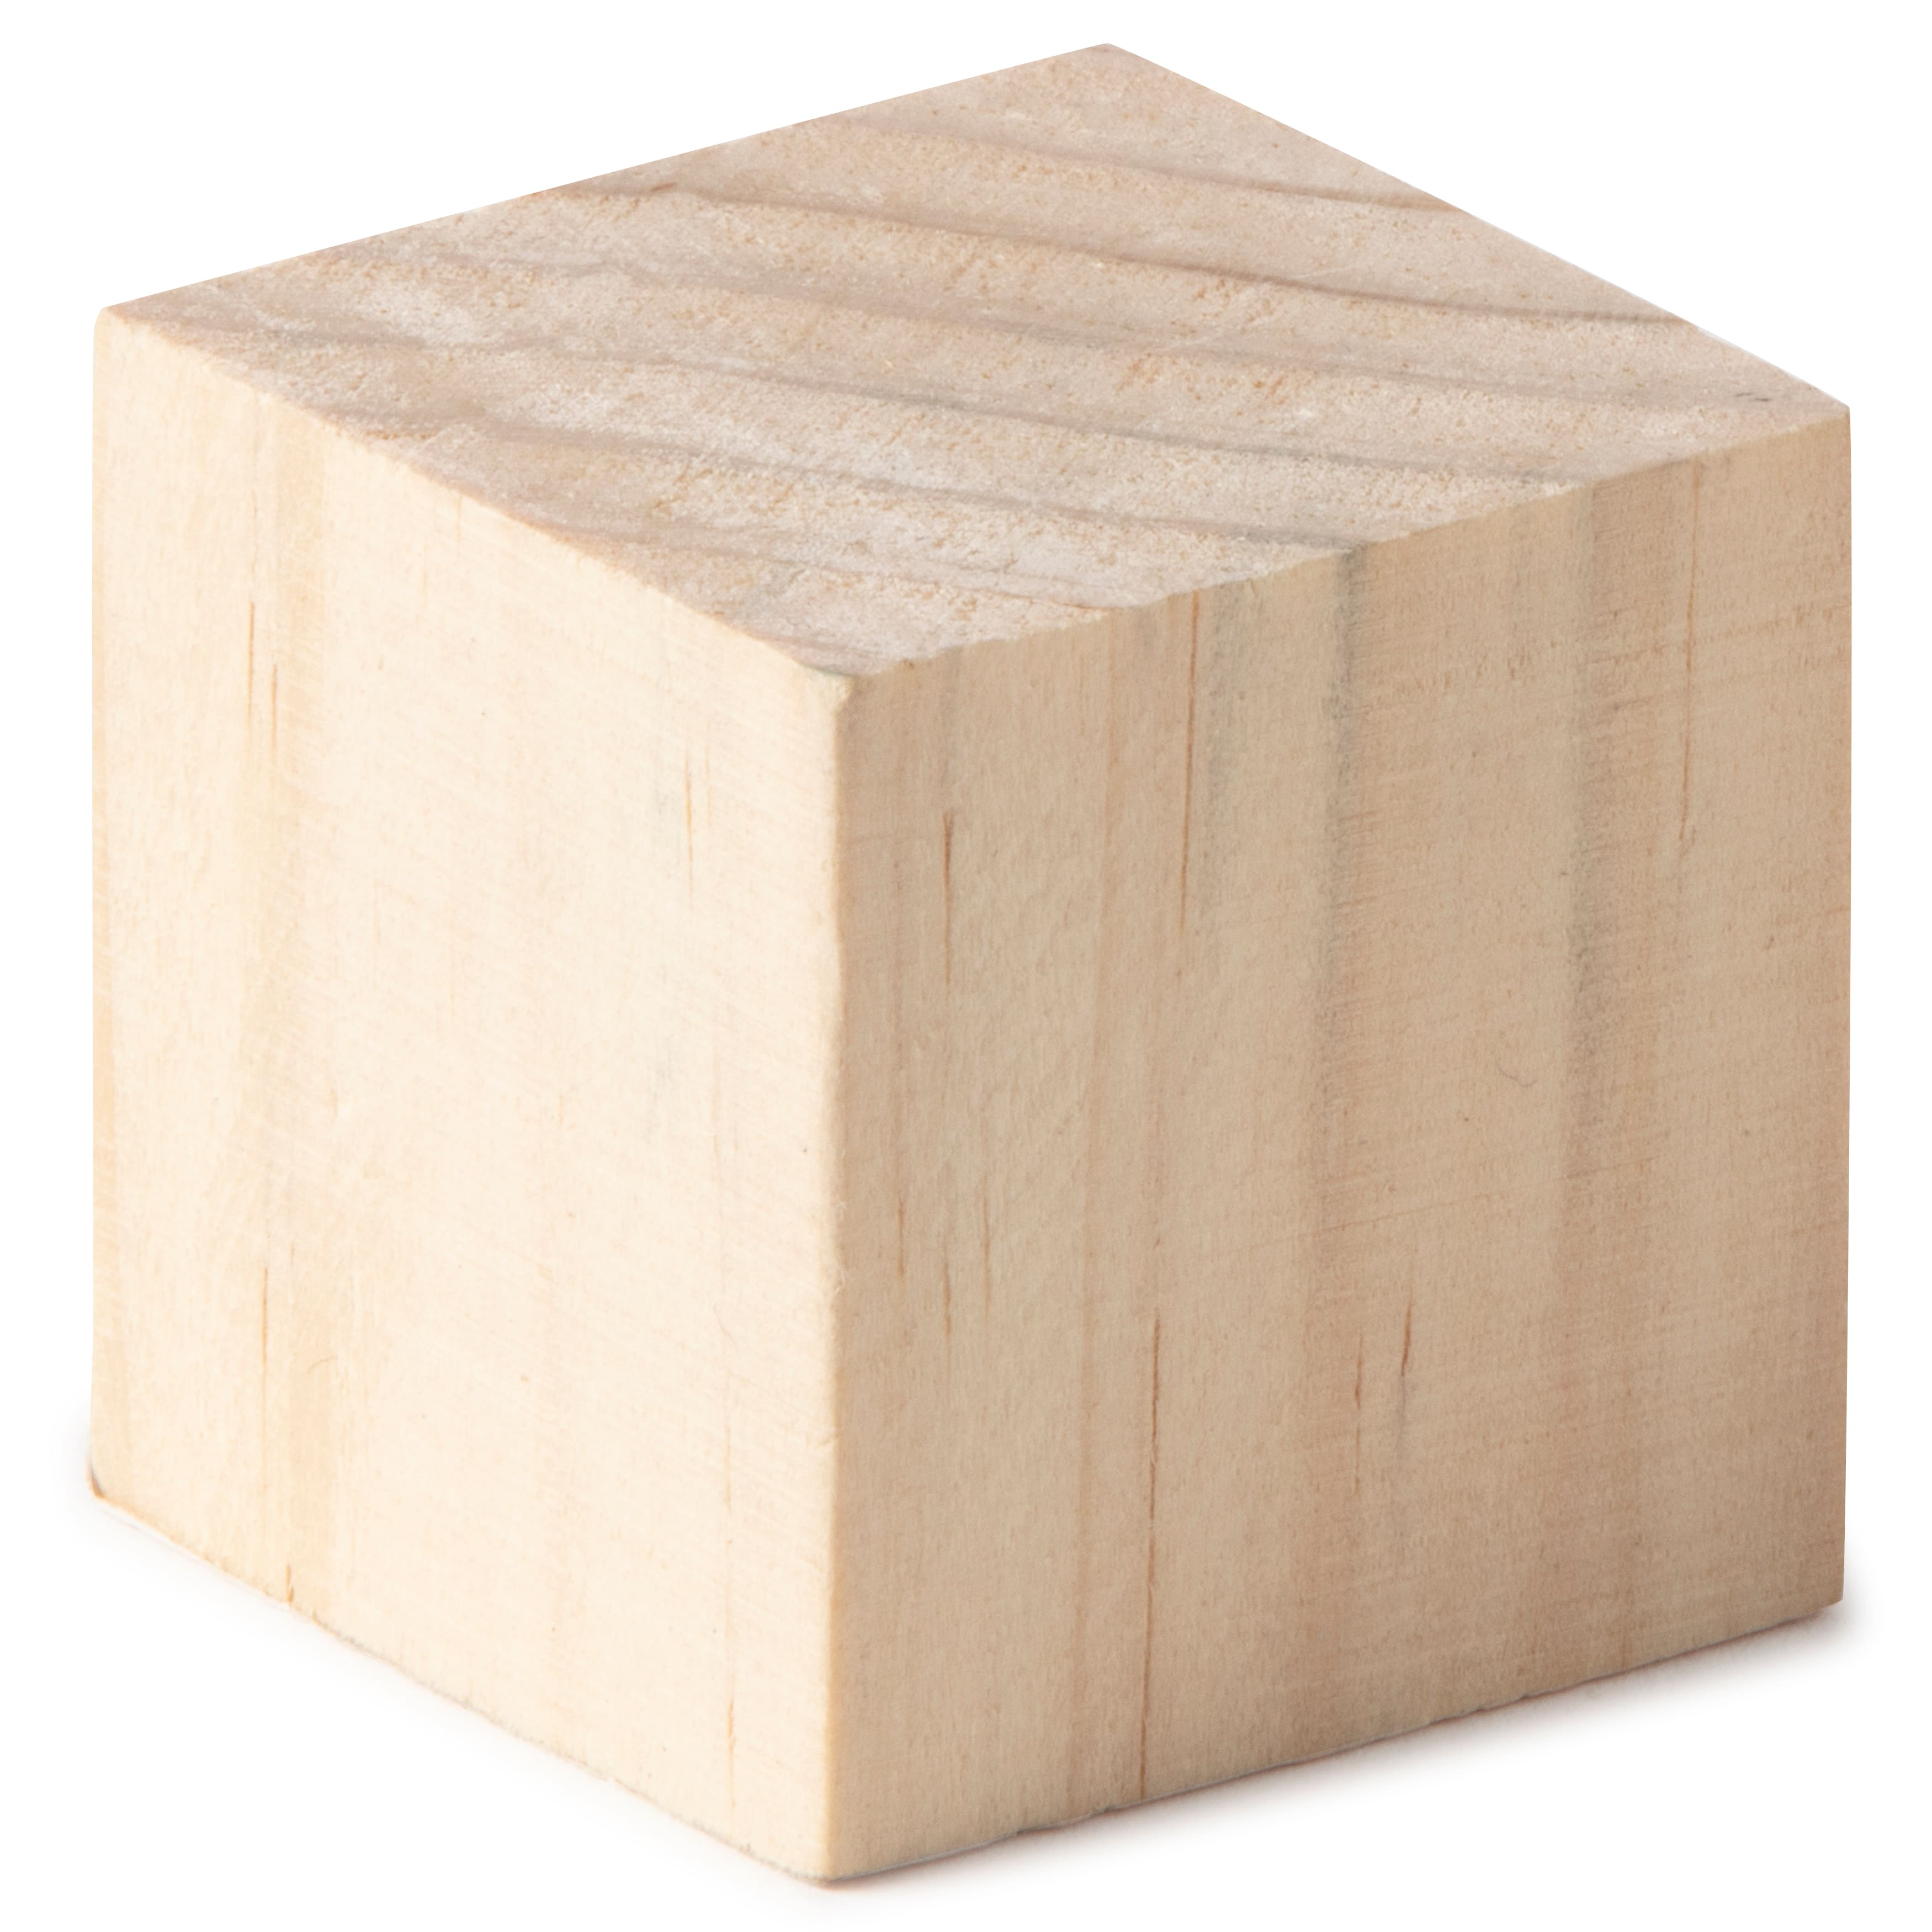 50 Pcs Small Plain Wooden Cubes, Wood Square Blocks for Crafts, DIY  Projects, 1, PACK - Kroger